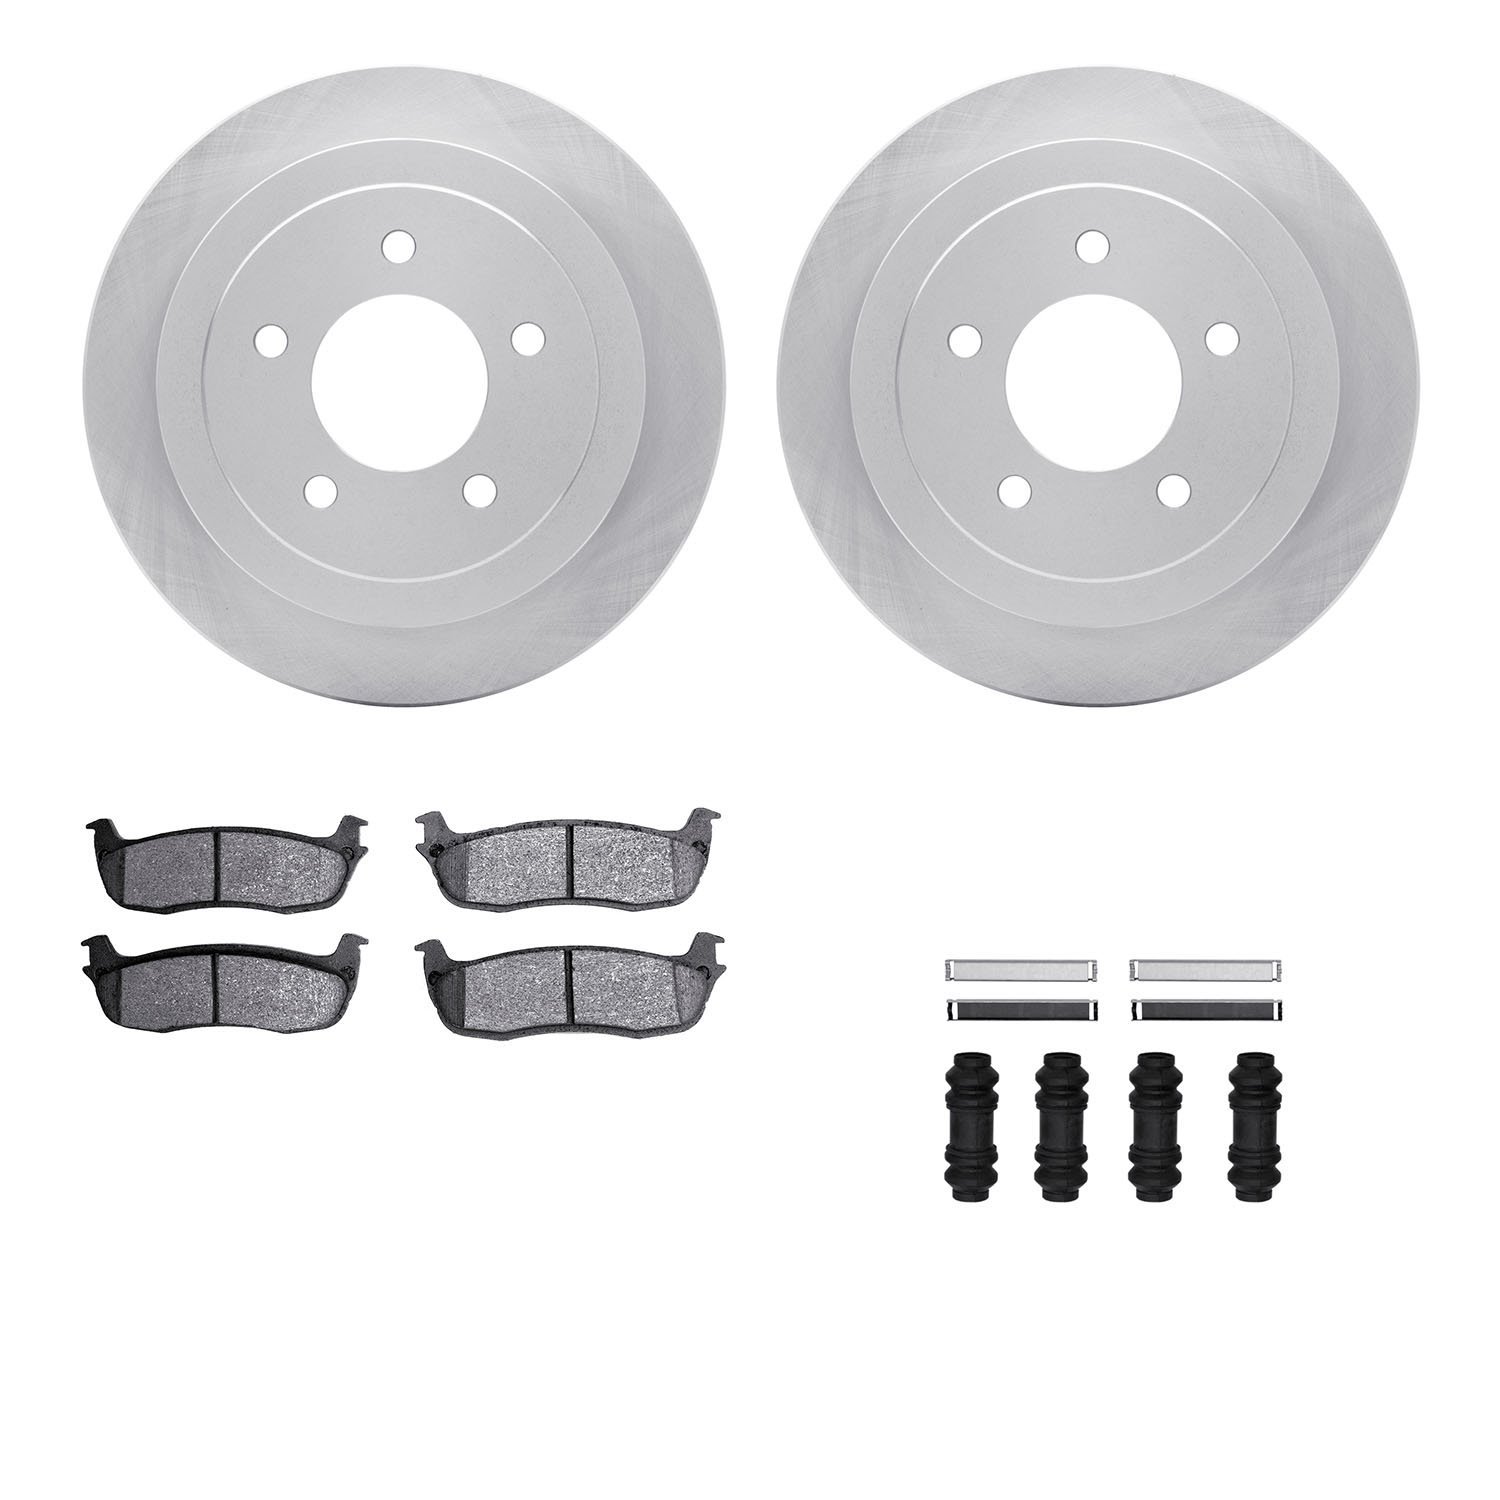 6412-54179 Brake Rotors with Ultimate-Duty Brake Pads Kit & Hardware, 1997-2004 Ford/Lincoln/Mercury/Mazda, Position: Rear